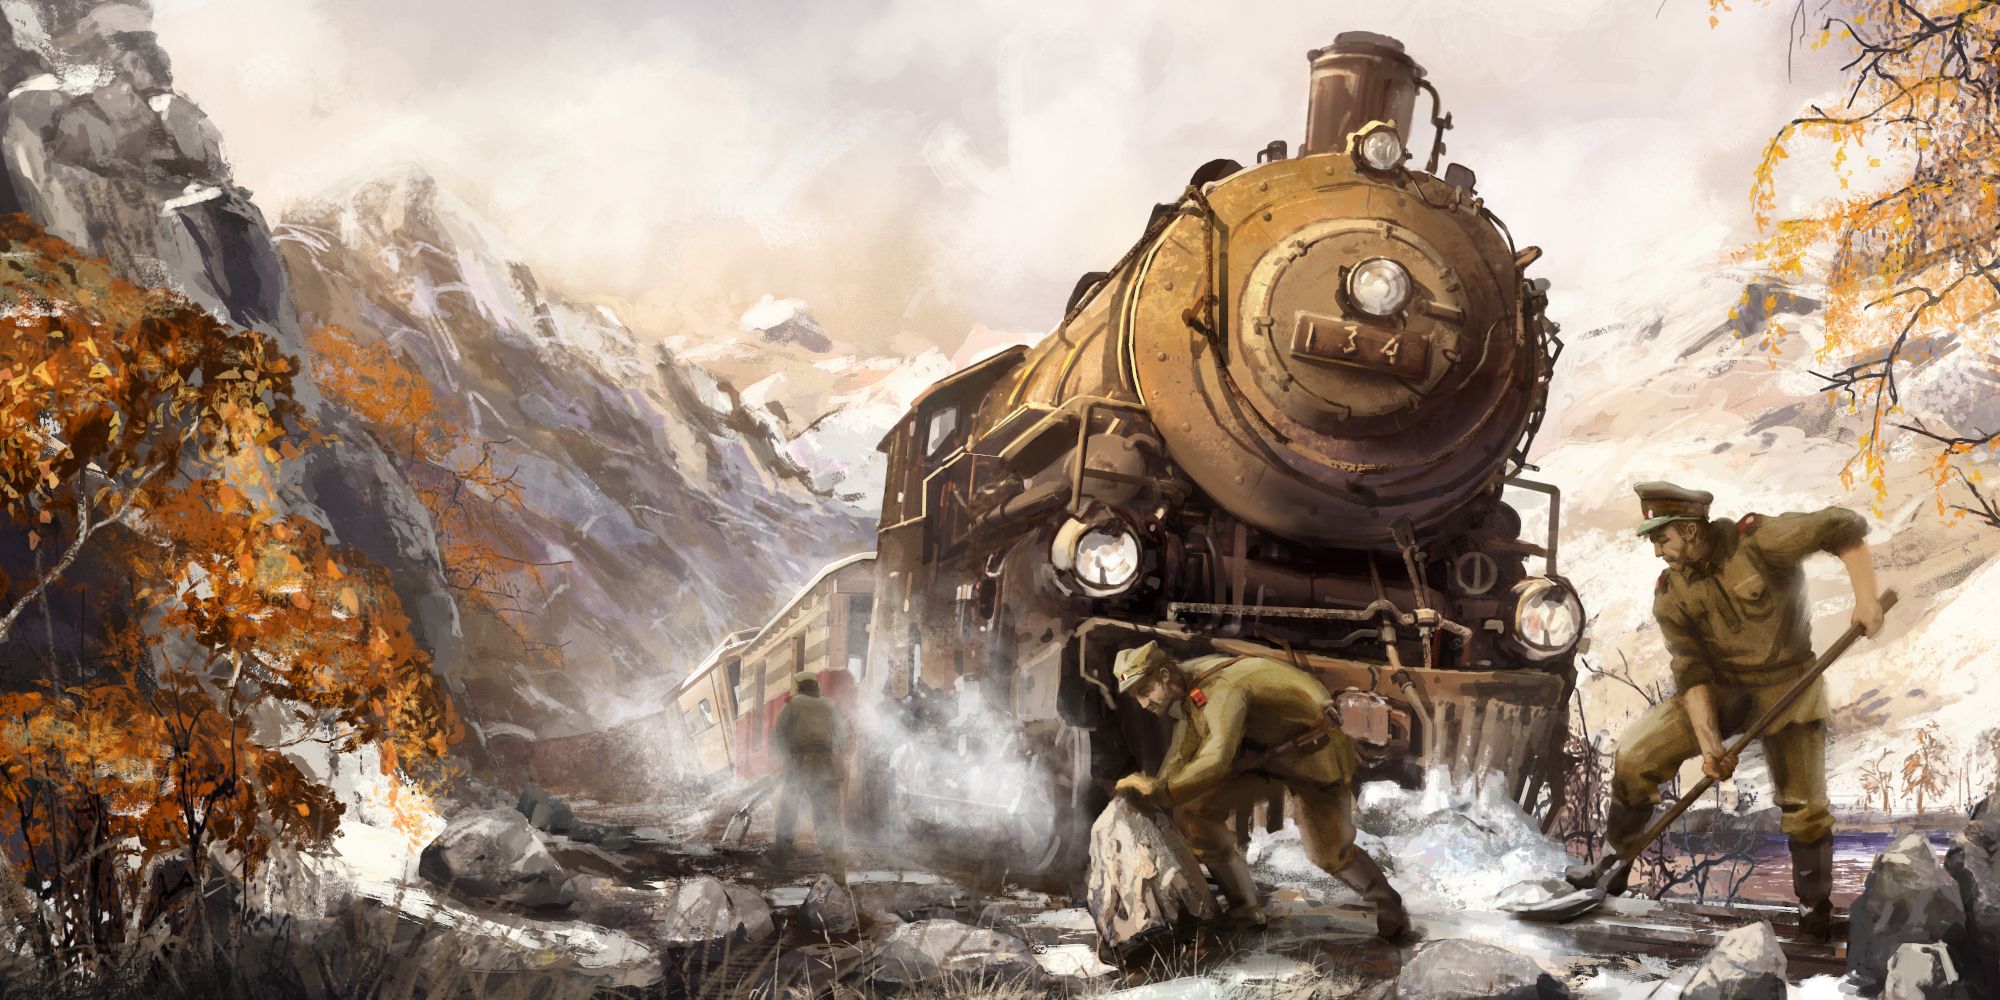 Art for Last Train Home shows soldiers working in front of a trains engine to clear the tracks while they are stuck in a mountain range.